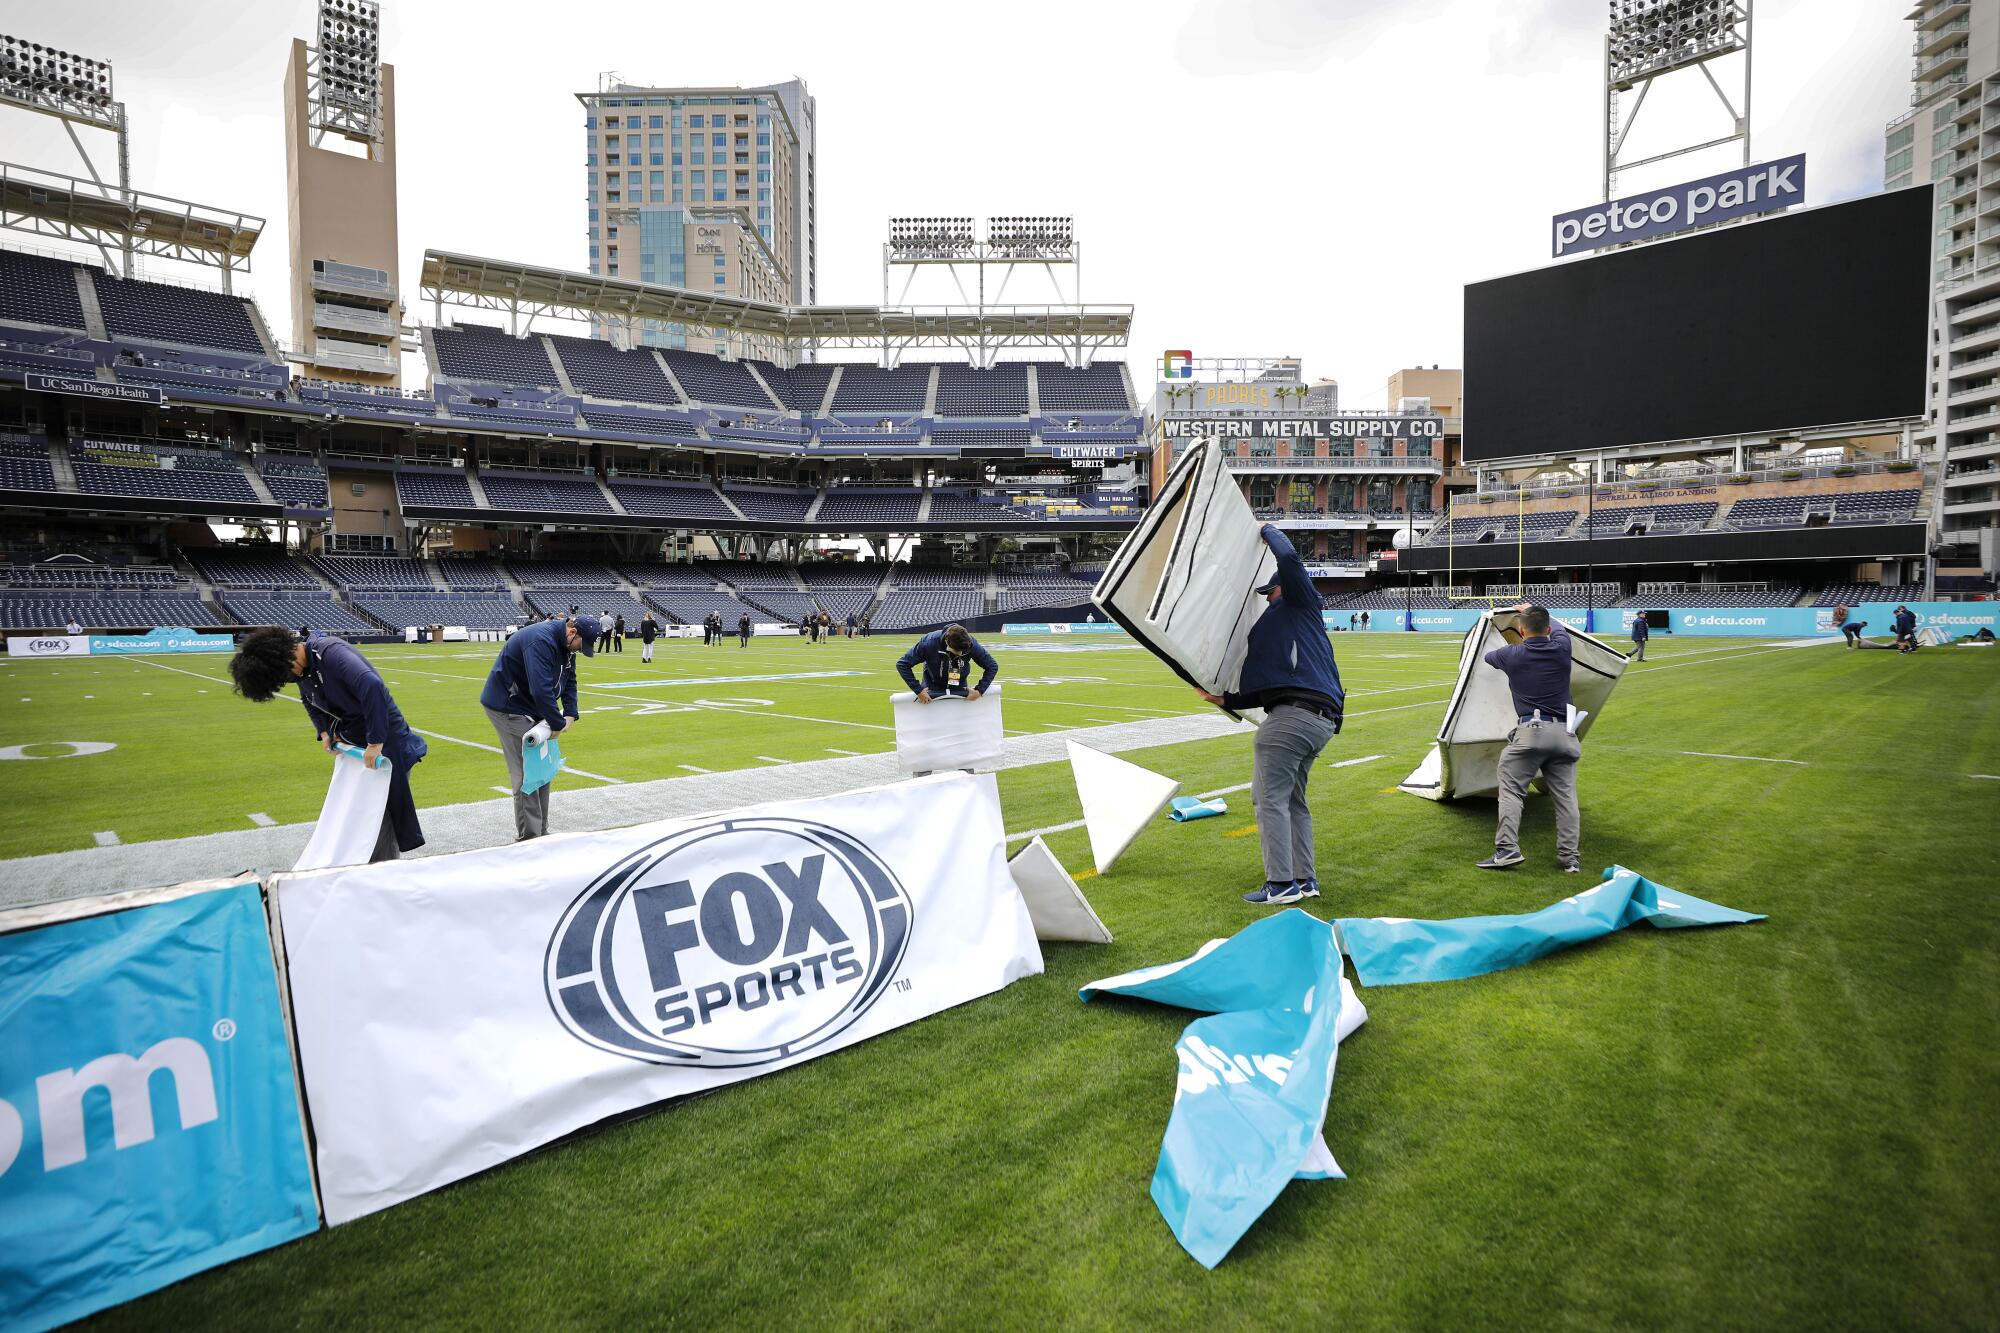 Workers take down sideline signage at Petco Park after the Holiday Bowl was canceled.